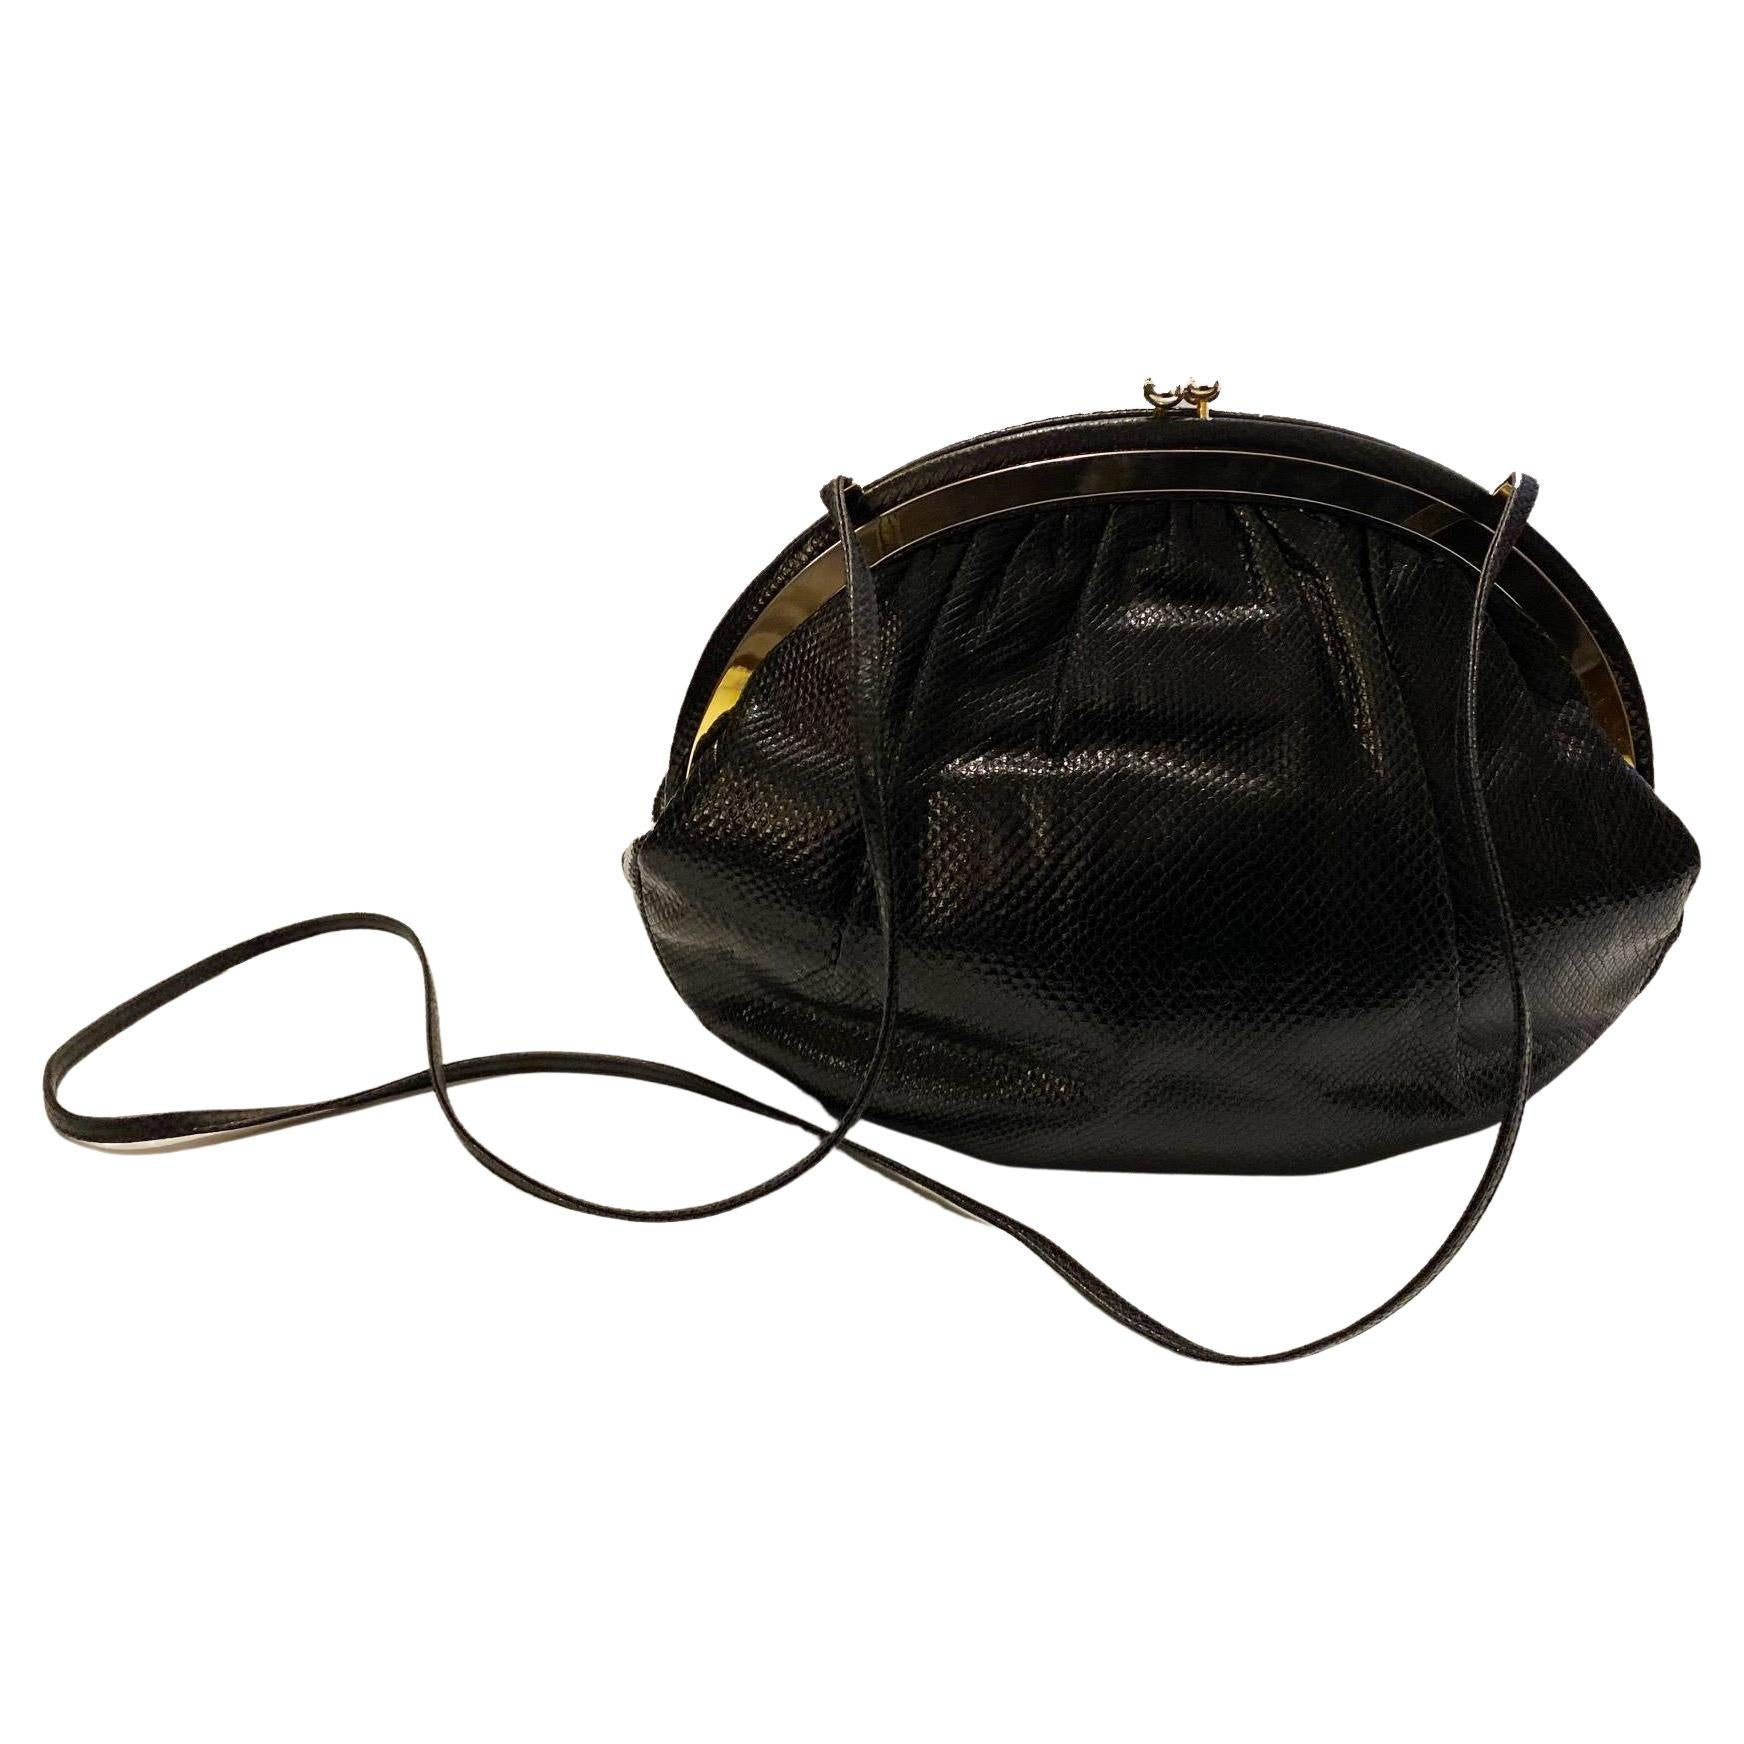 1990s Judith Leiber Karung Black Shoulder Bag with Gems and Goldware In Good Condition For Sale In London, GB